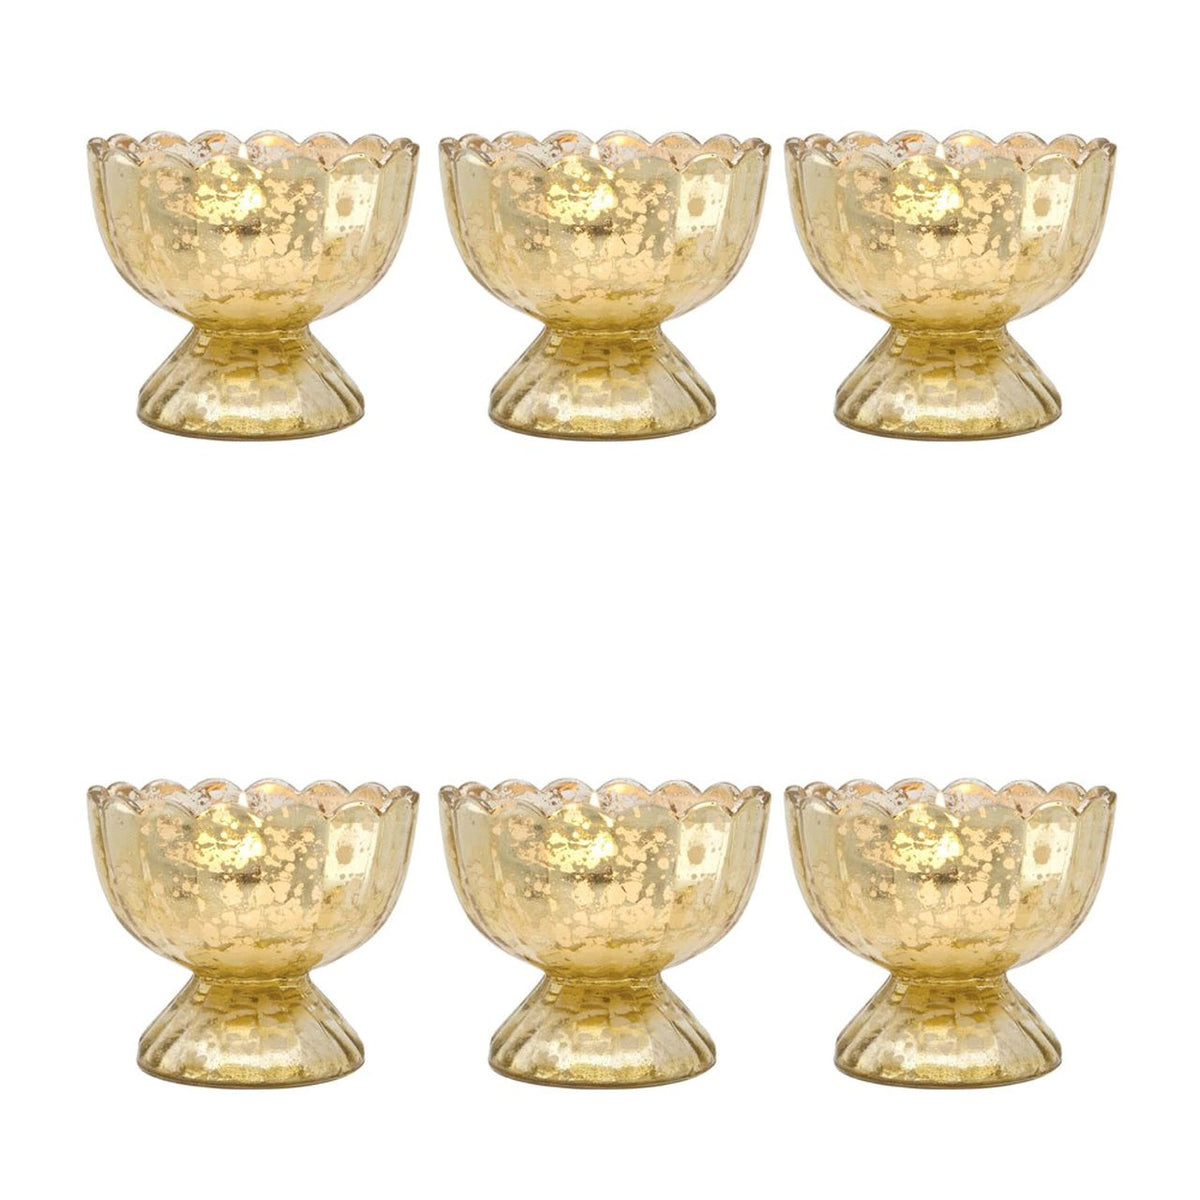 6-Pack Vintage Mercury Glass Chalice Candle Holder (3-Inch, Suzanne Design, Gold) - For Use with Tea Lights - For Home Decor, Parties and Wedding Decorations - Luna Bazaar | Boho &amp; Vintage Style Decor